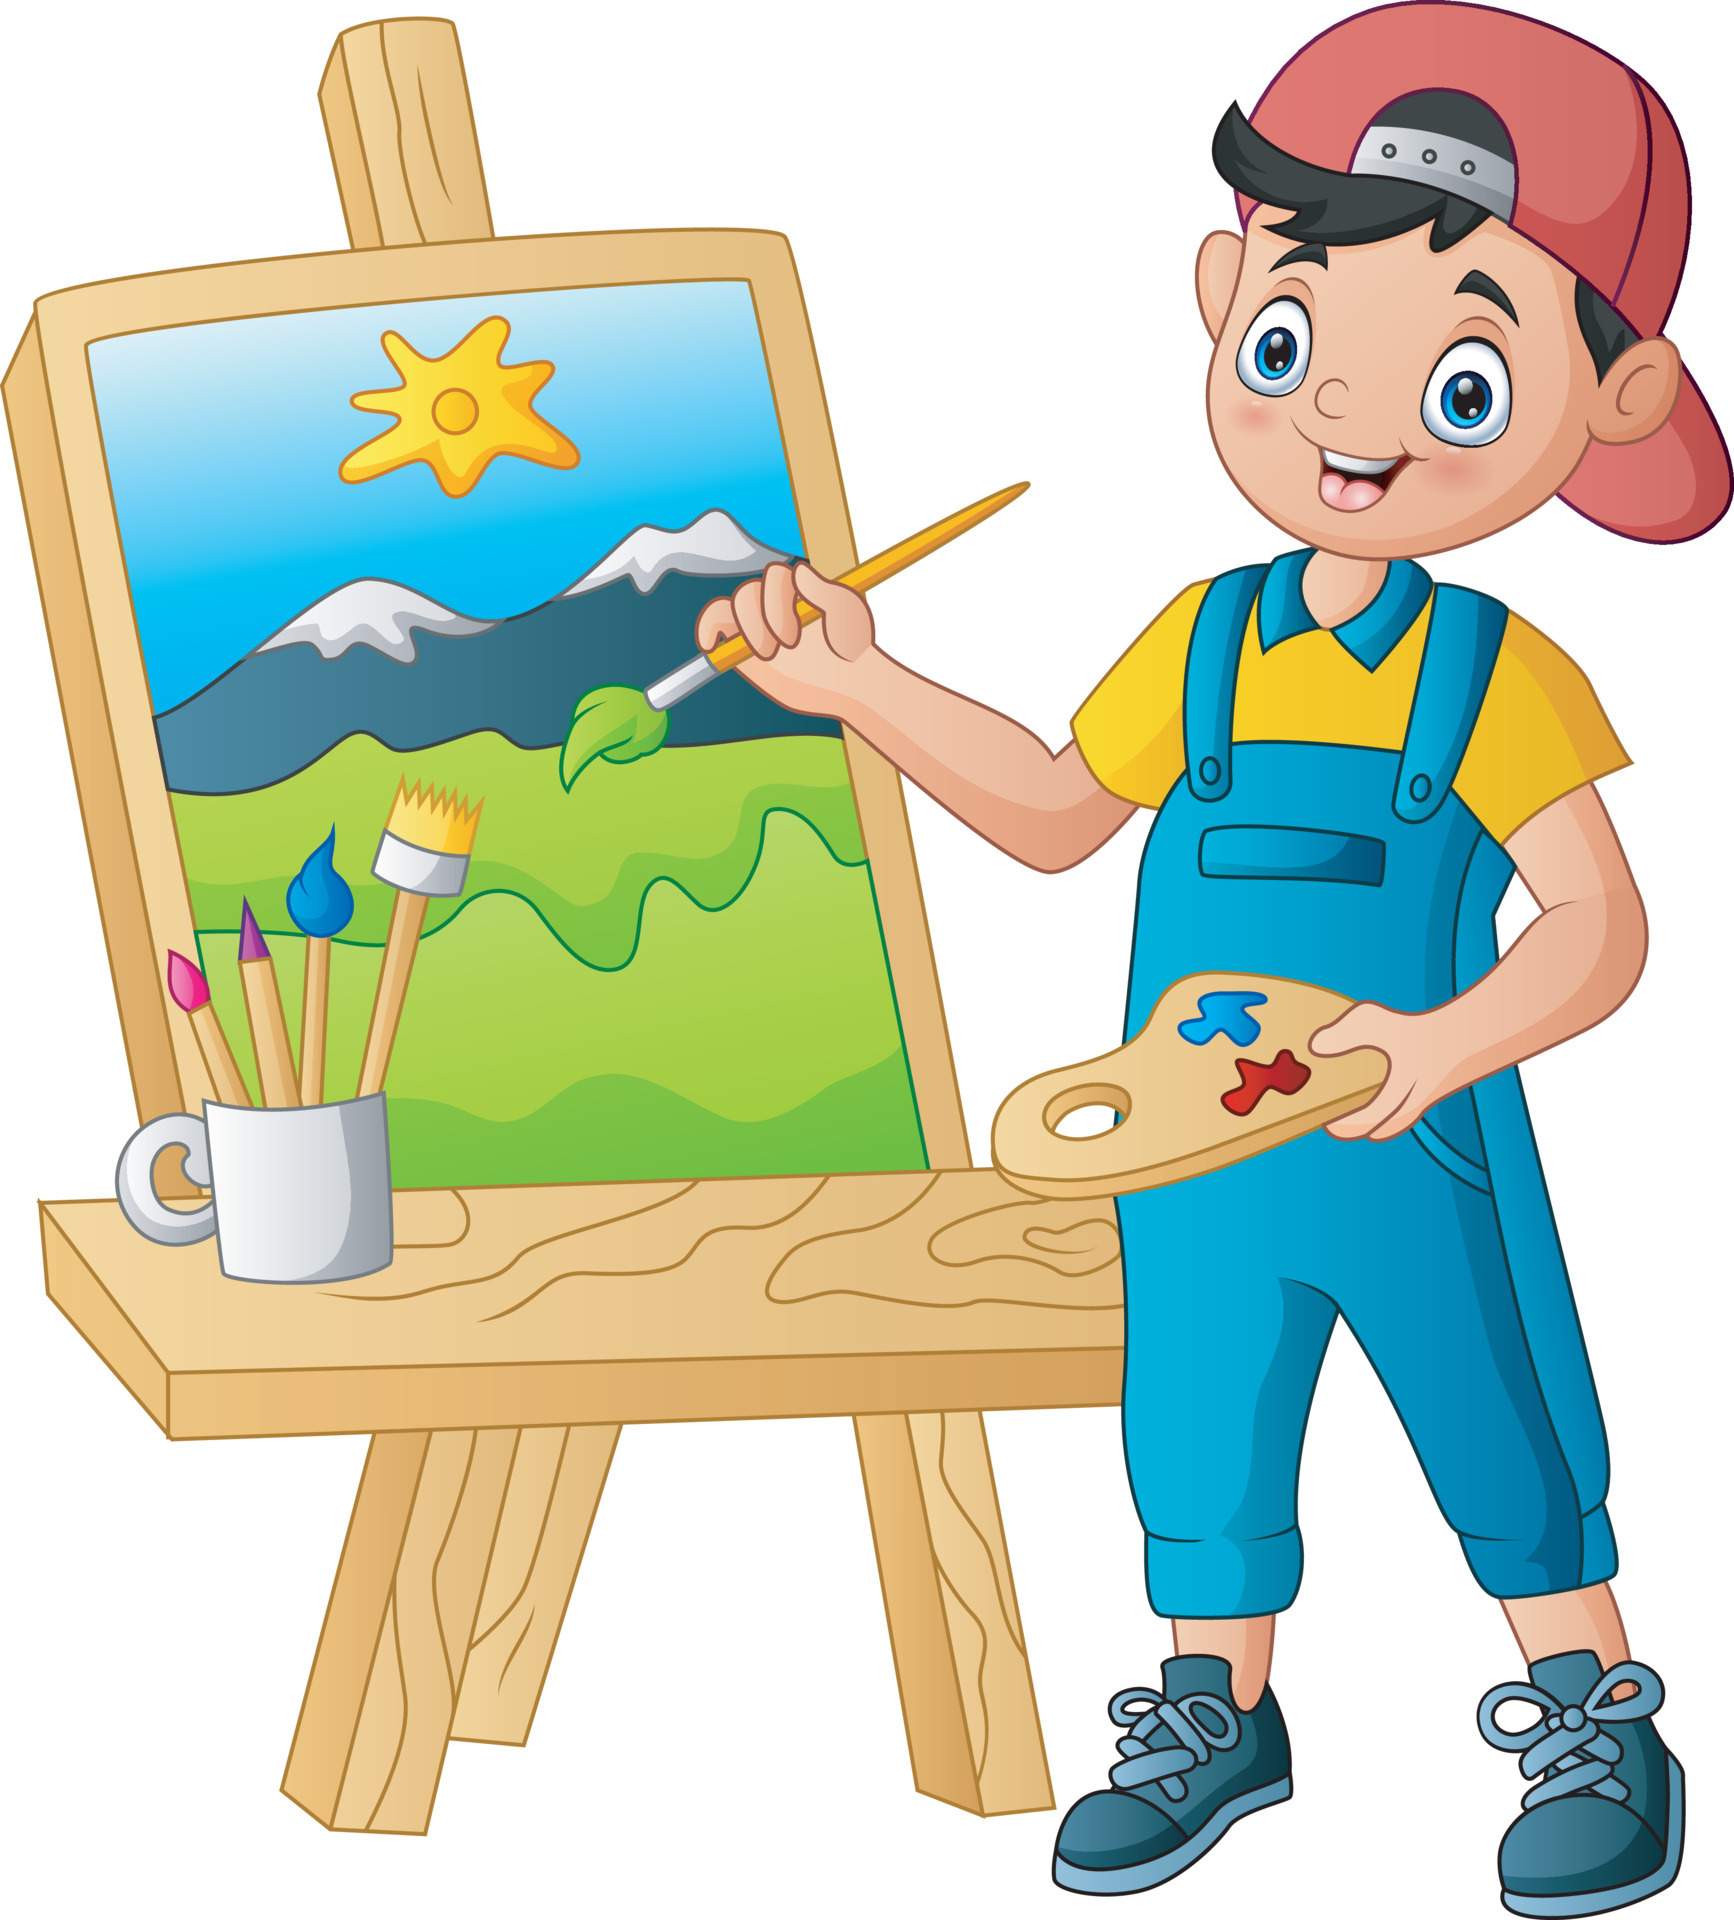 https://static.vecteezy.com/system/resources/previews/006/732/296/original/boy-painting-a-landscape-on-the-canvas-free-vector.jpg